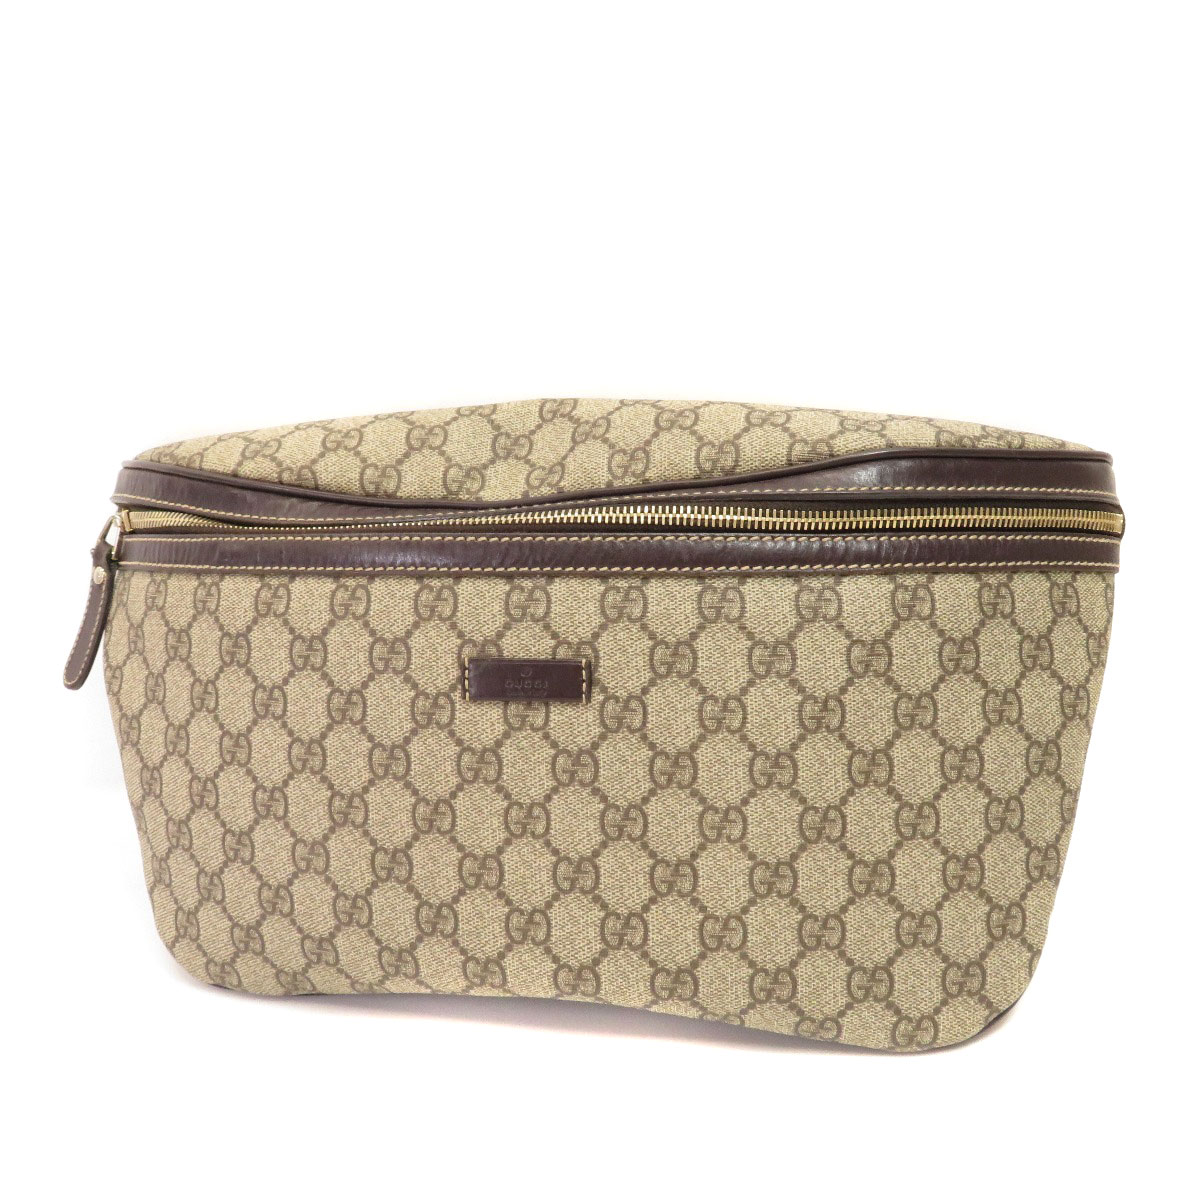 Gucci 211110 001998 GG hip bag · waist bag women ー The best place buy Brand Bags Watches Jewelry,